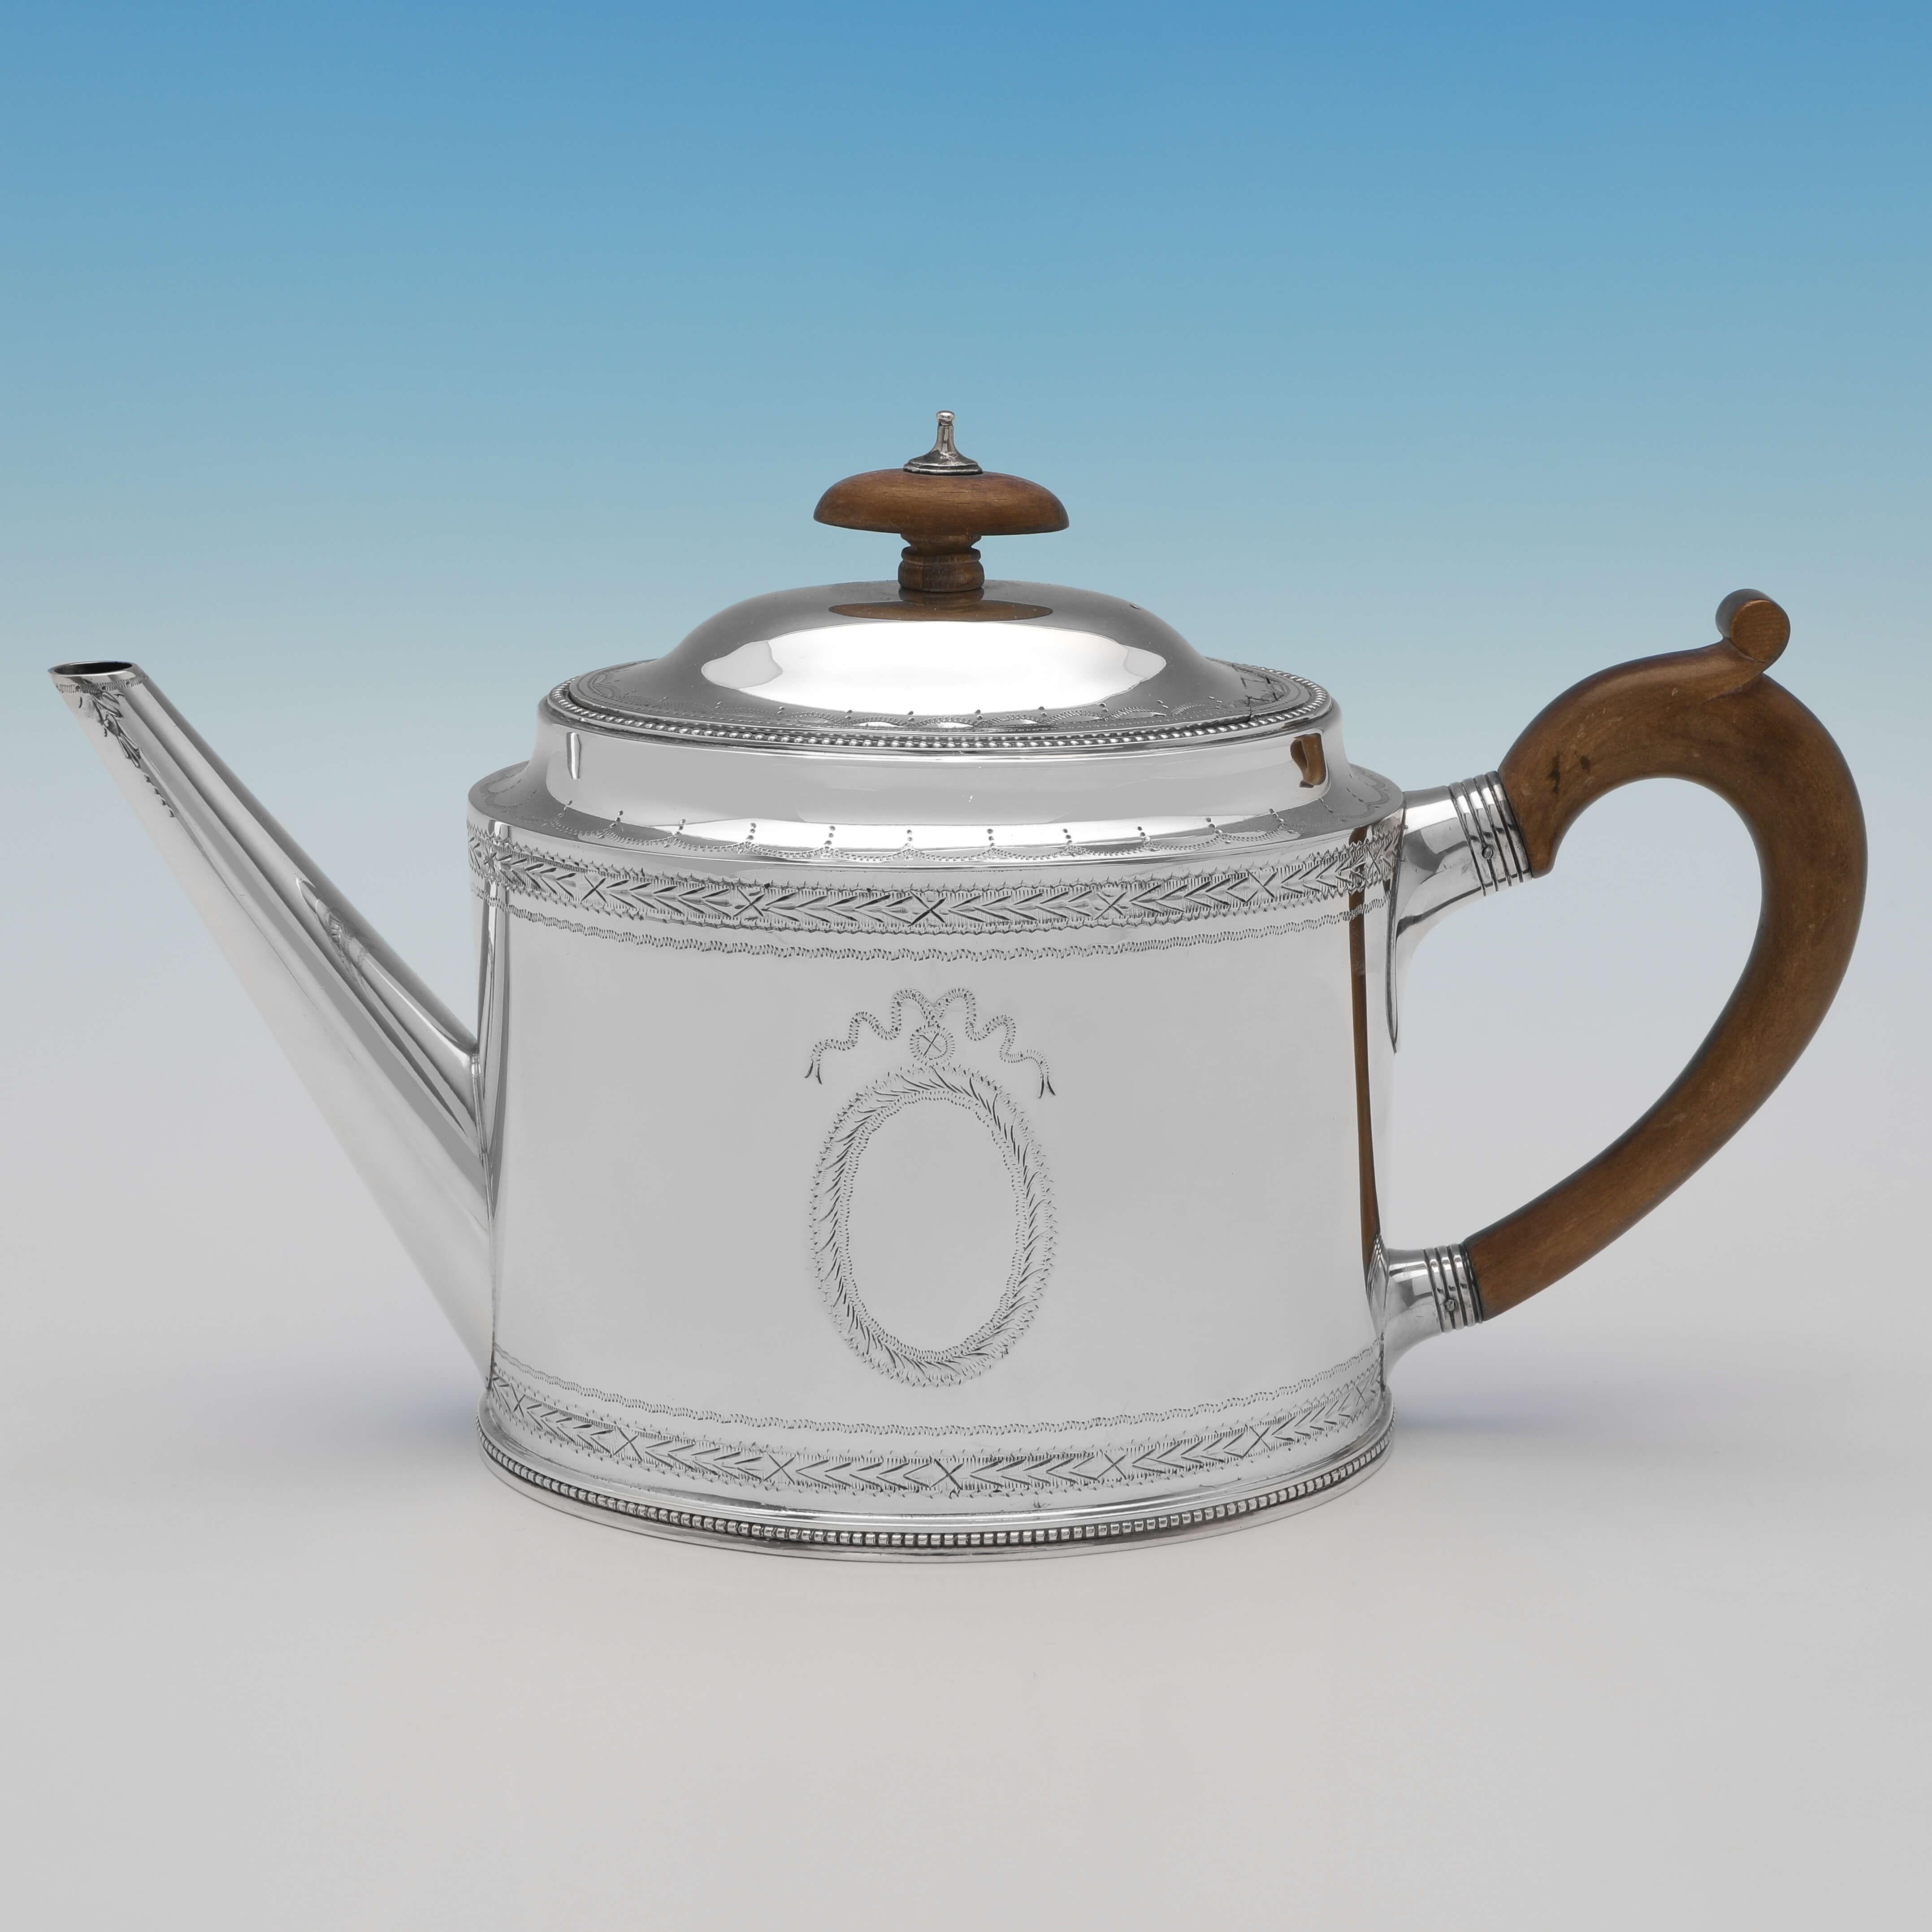 Hallmarked in London in 1962 by C. J. Vander, this handsome, 4 piece sterling silver tea set, is in the 'Hester Bateman' style. 

The teapot measures 6